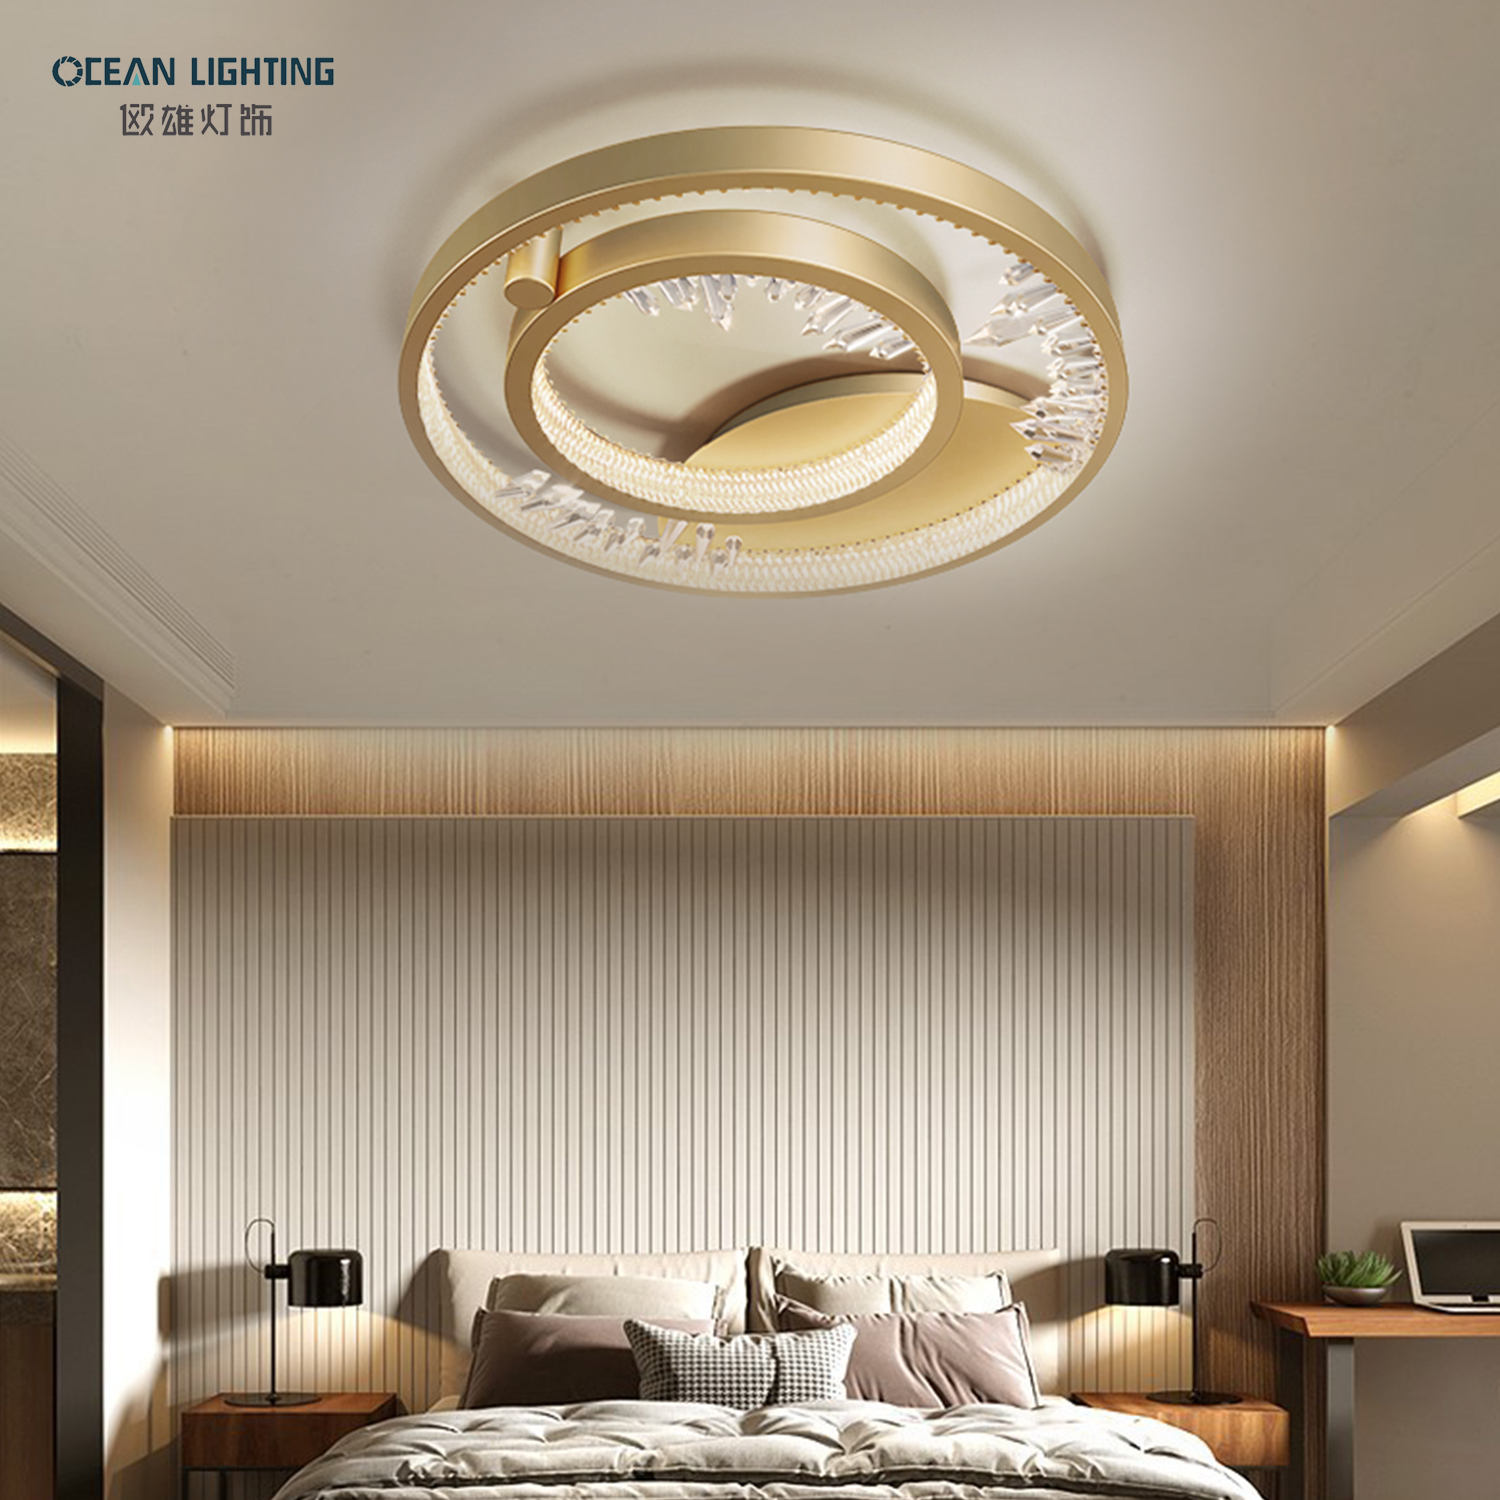 House Entrance Round Flat Contemporary Acrylic LED Decorative Lamp Home Bedroom Modern Lighting Fixtures Ceiling Lamp